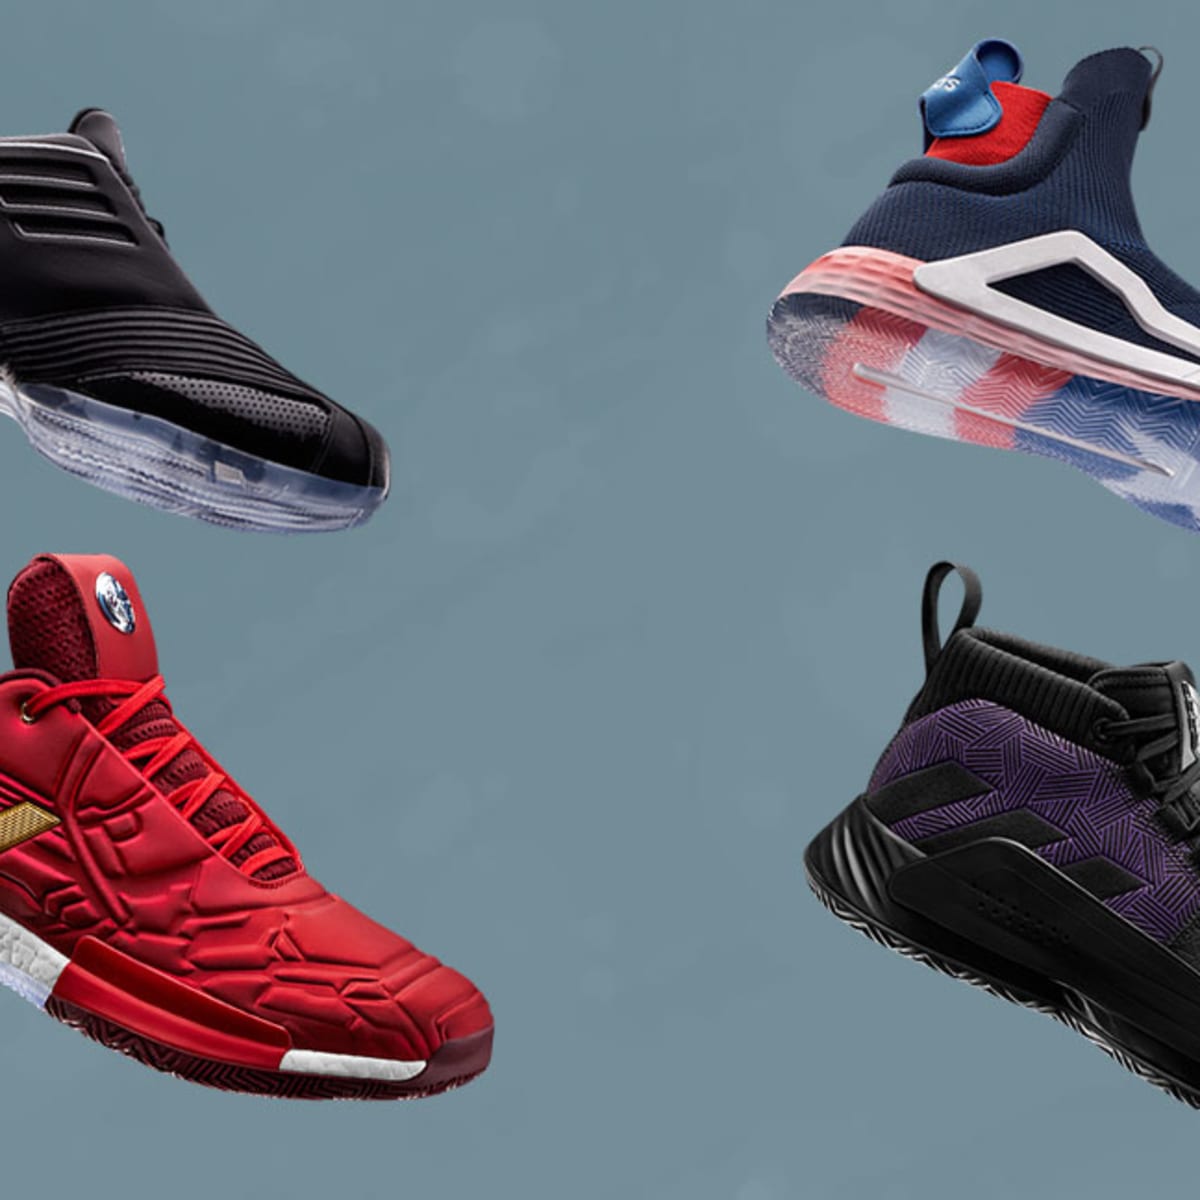 Adidas Basketball and Marvel Team Up for Limited-Edition Us' Collection - Men's Journal